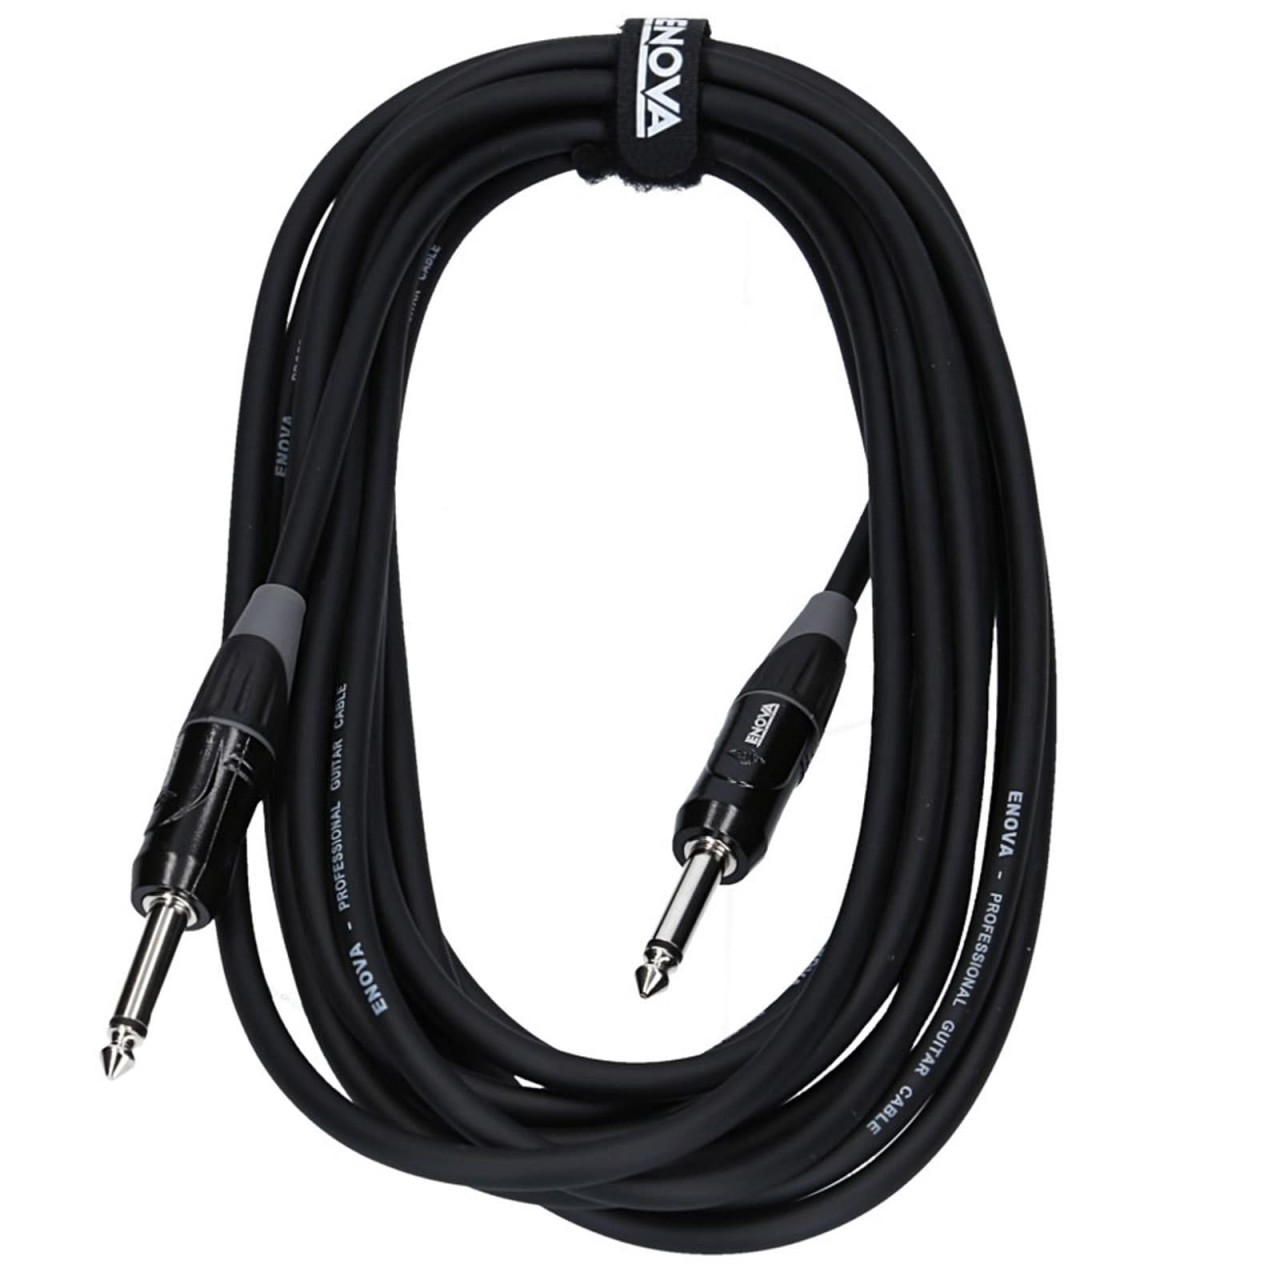 ENOVA, 10 meter guitar cable with 6.3 mm jack connector 2 pin